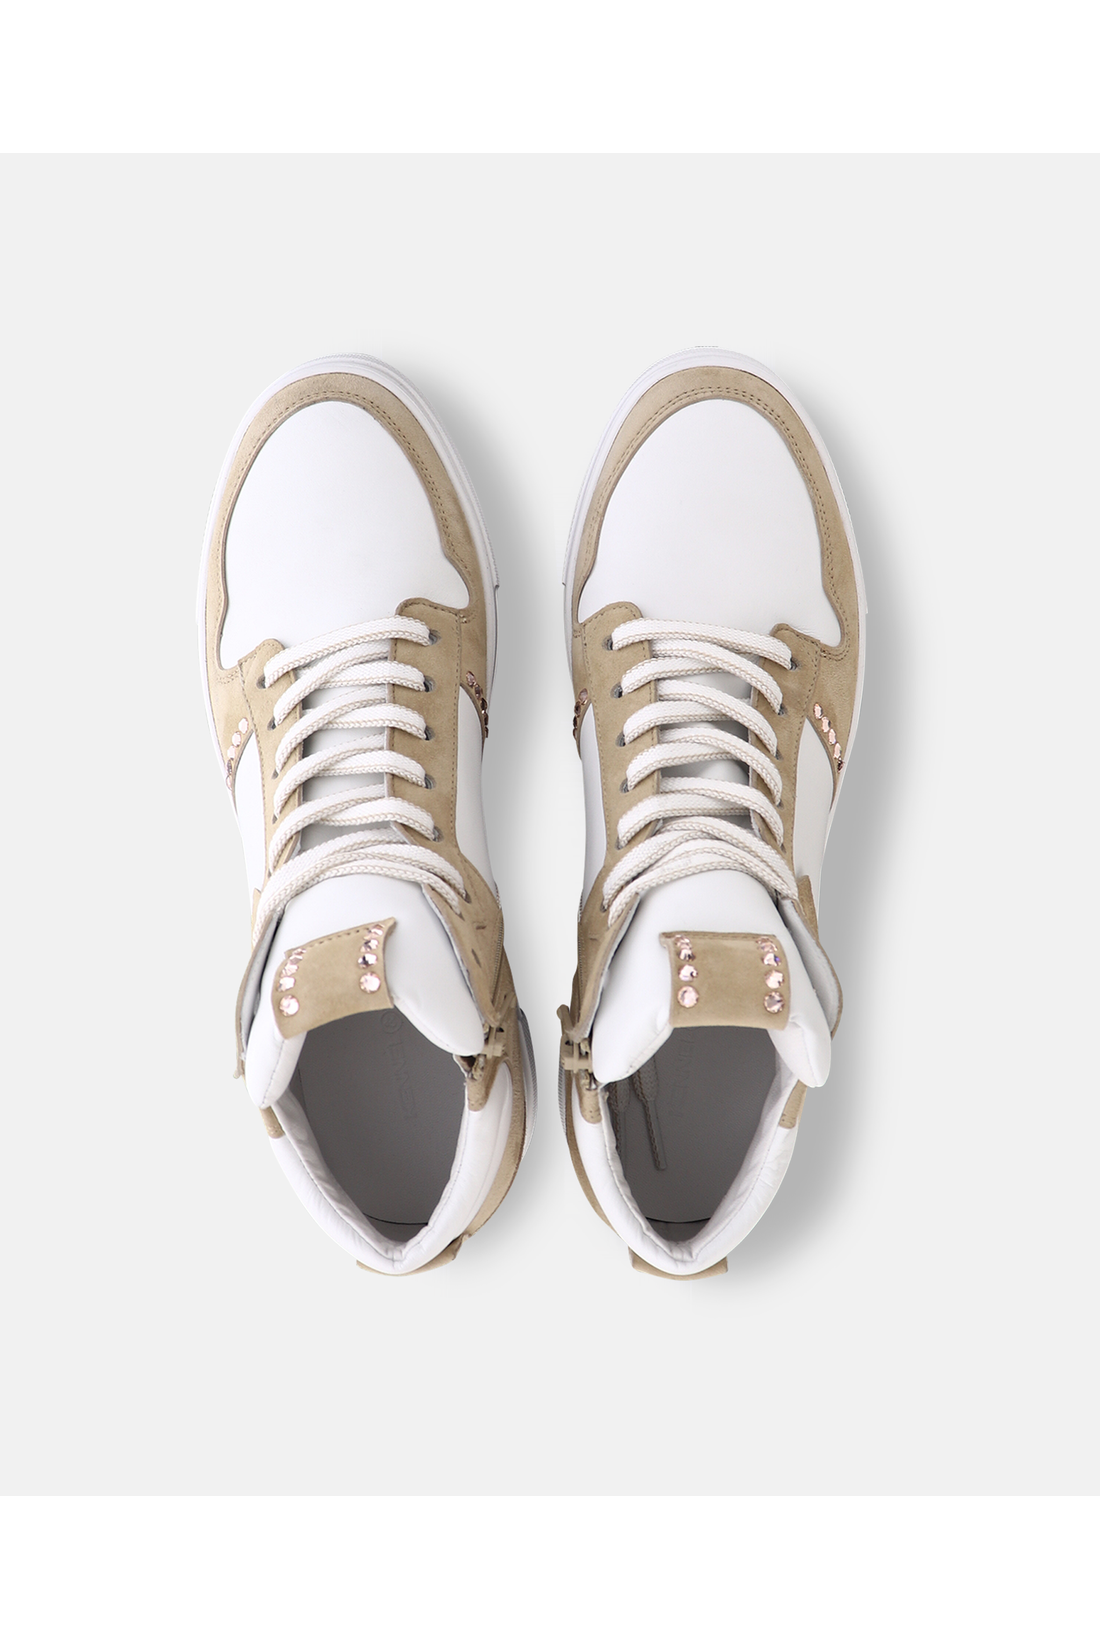 Kennel-Schmenger-OUTLET-SALE-CHAMP-Sneakers-ARCHIVE-COLLECTION-4.png